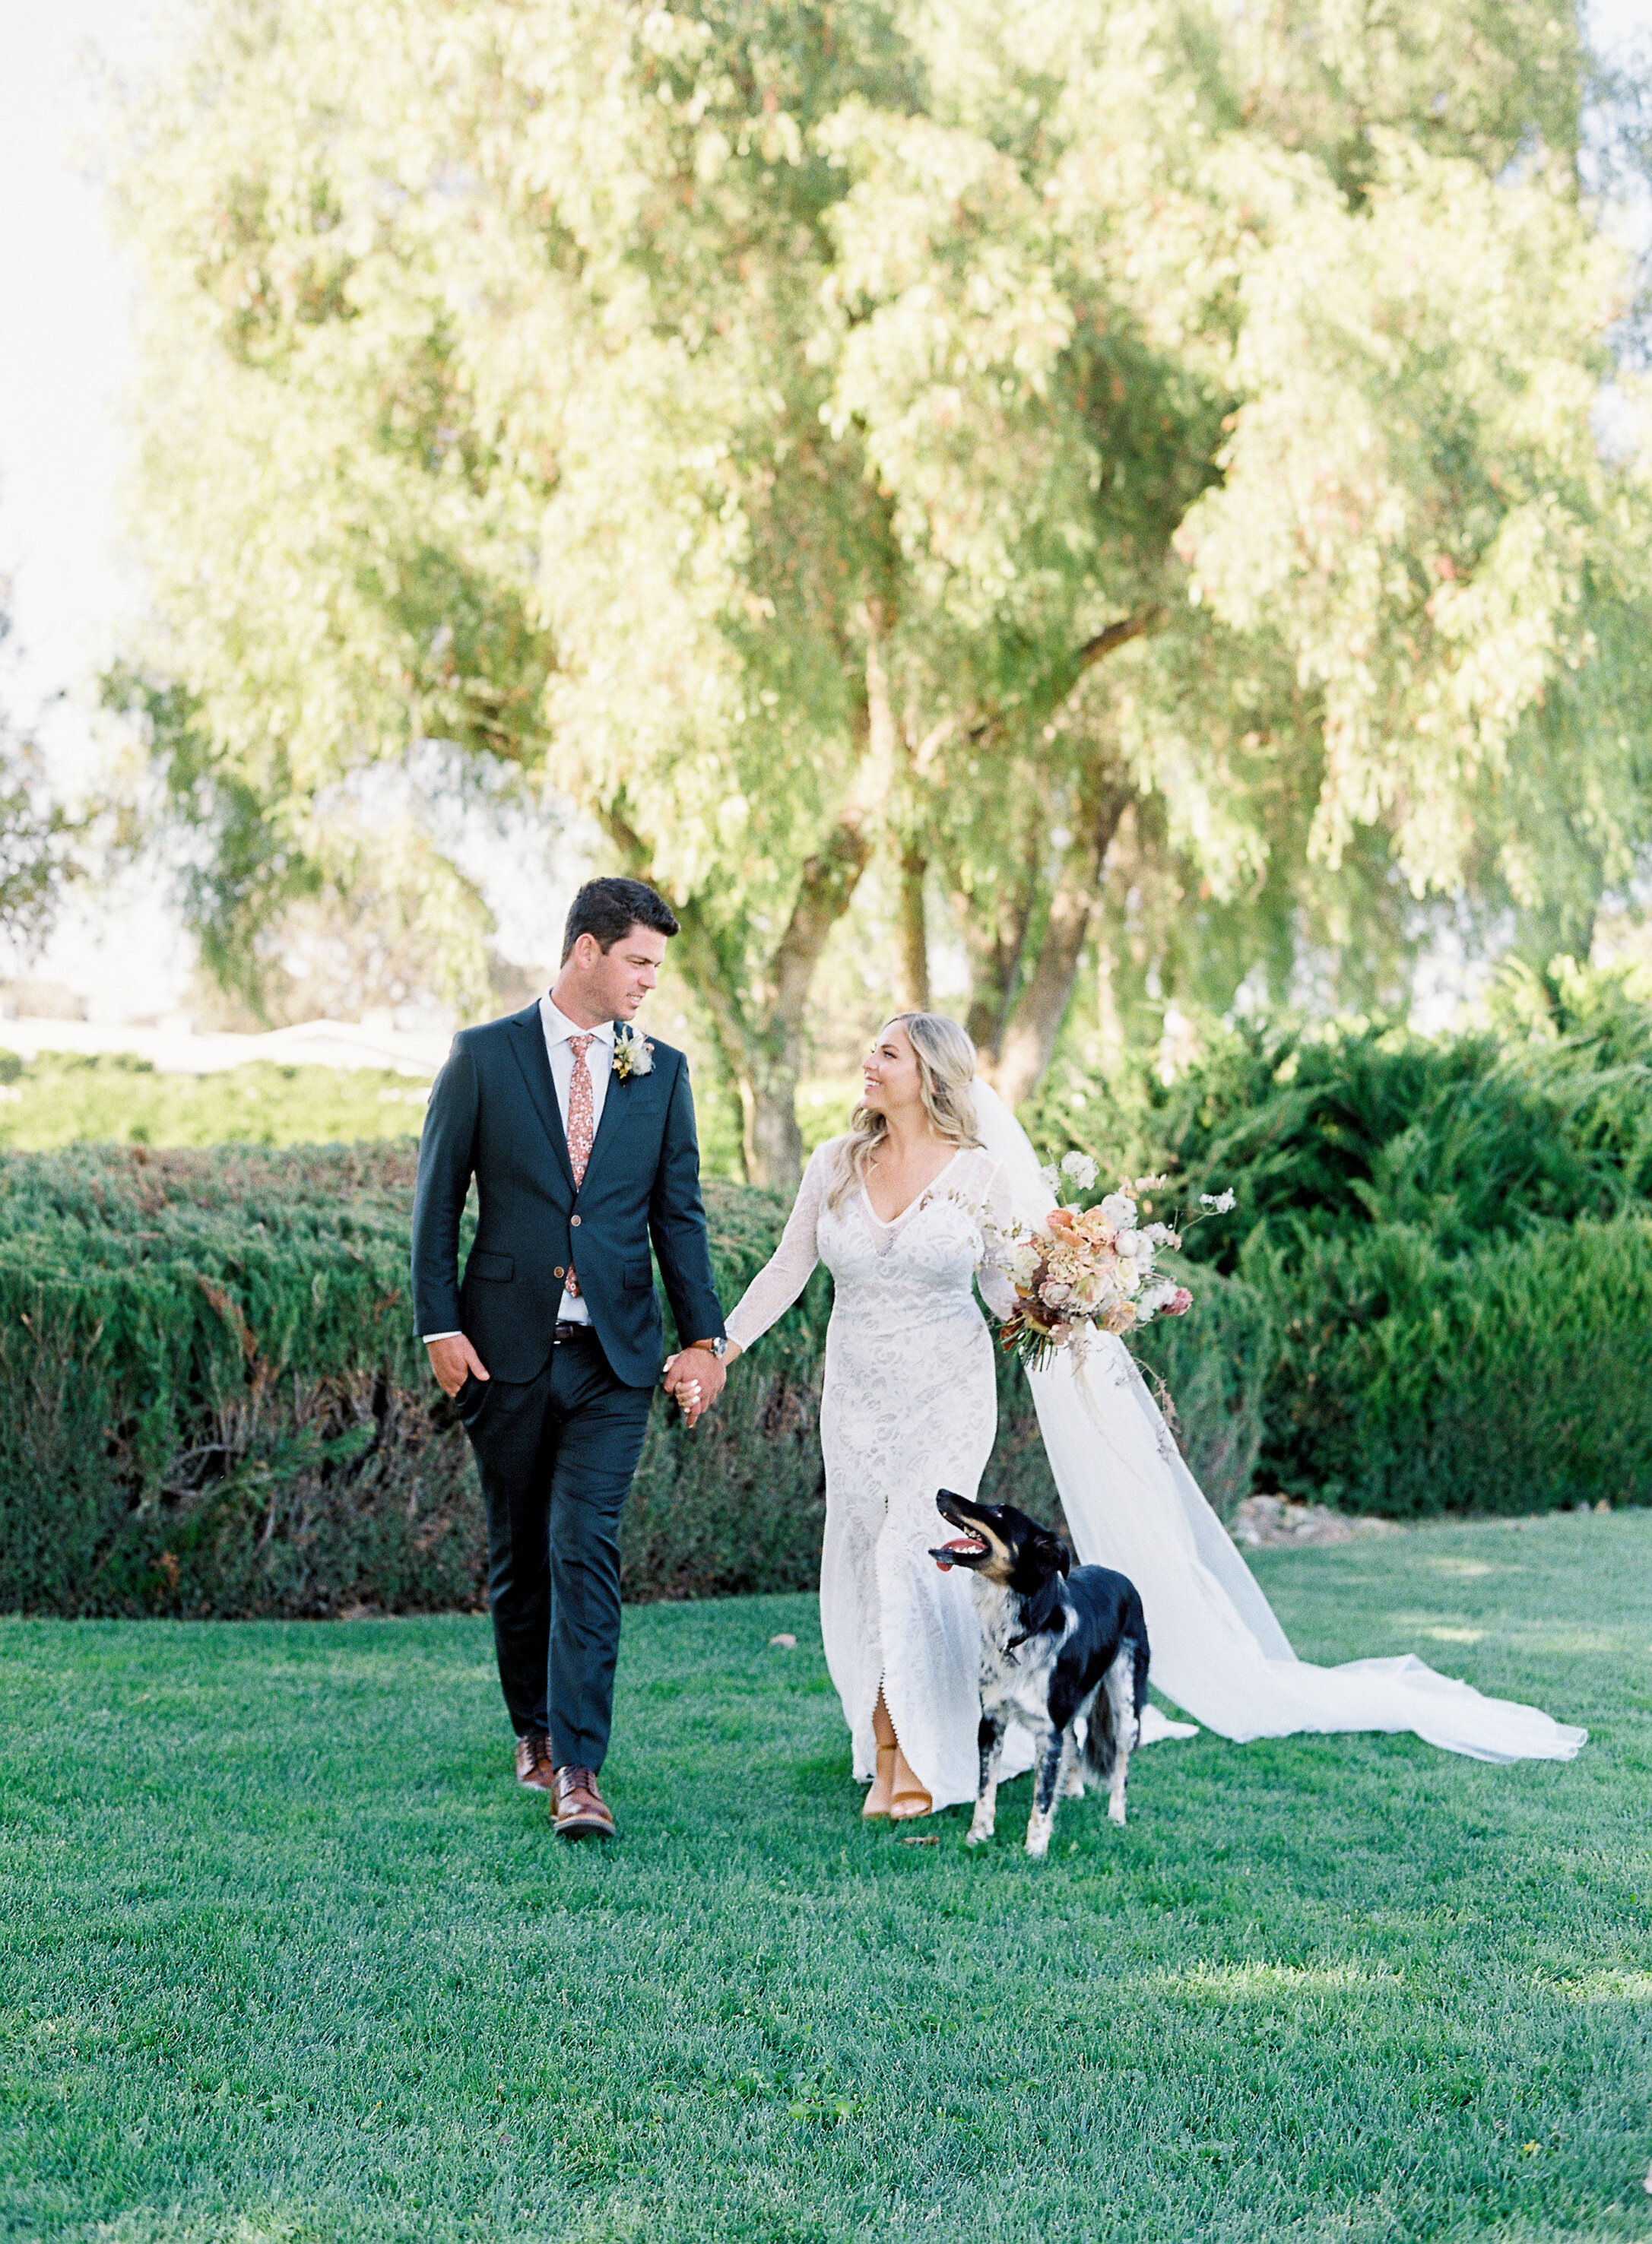 www.santabarbarawedding.com | Sposto Photography | Roblar Farm | Palm + Pine Events | Green Apple Event Co. | Petals + Pop | Grace Loves Lace | Grooms Grotto | Bride and Groom with Dog